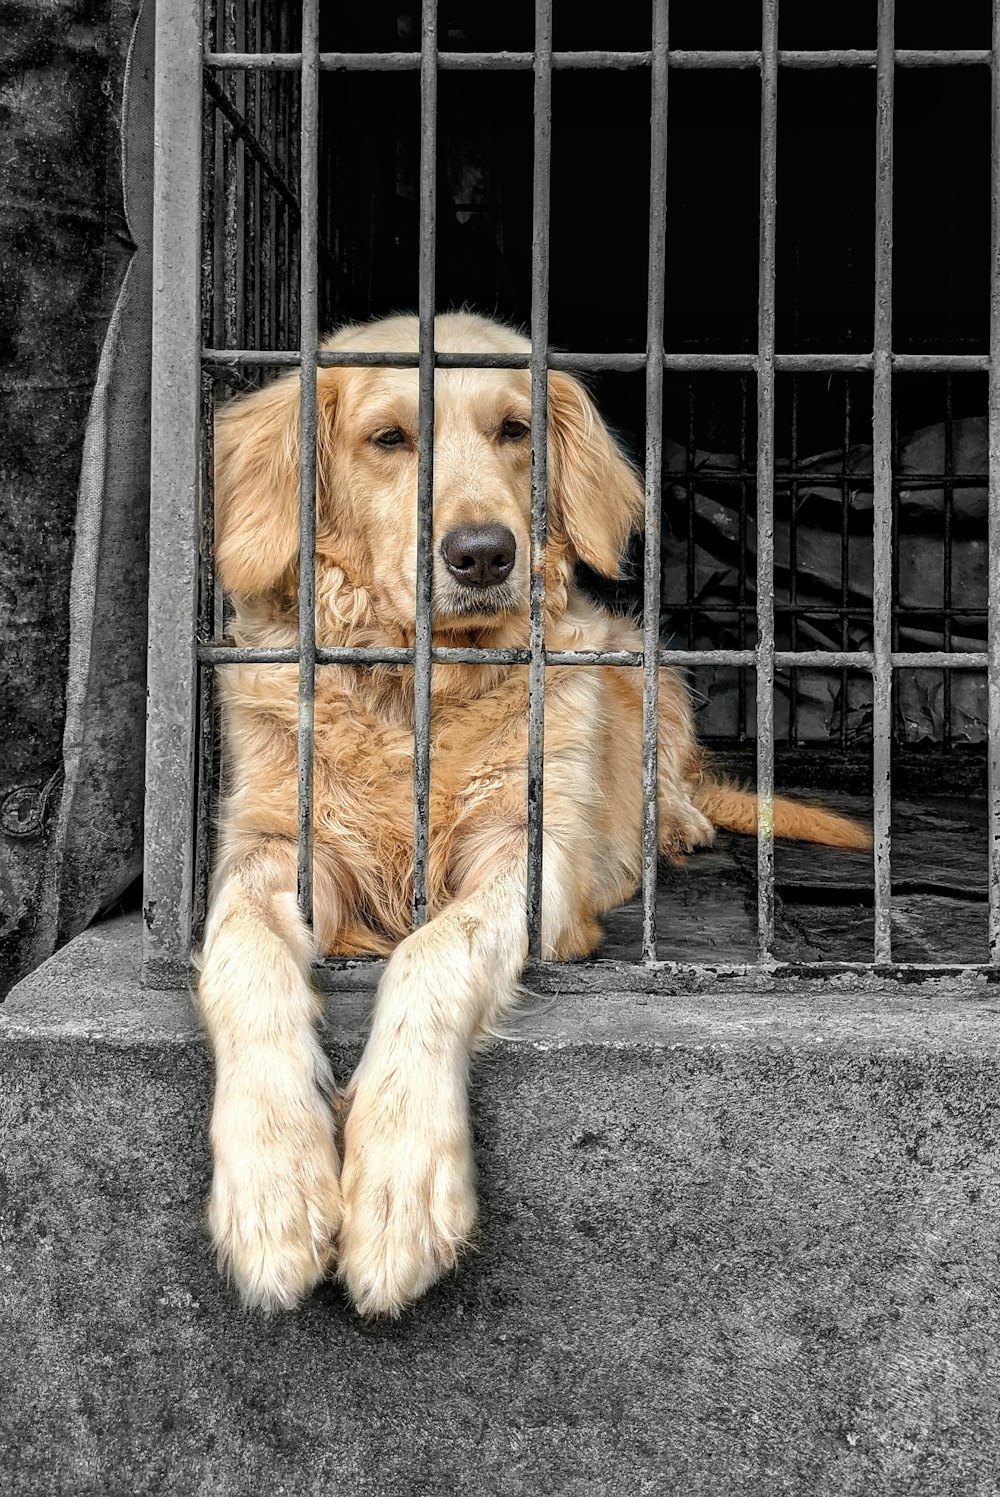 a dog sitting behind bars in a jail cell